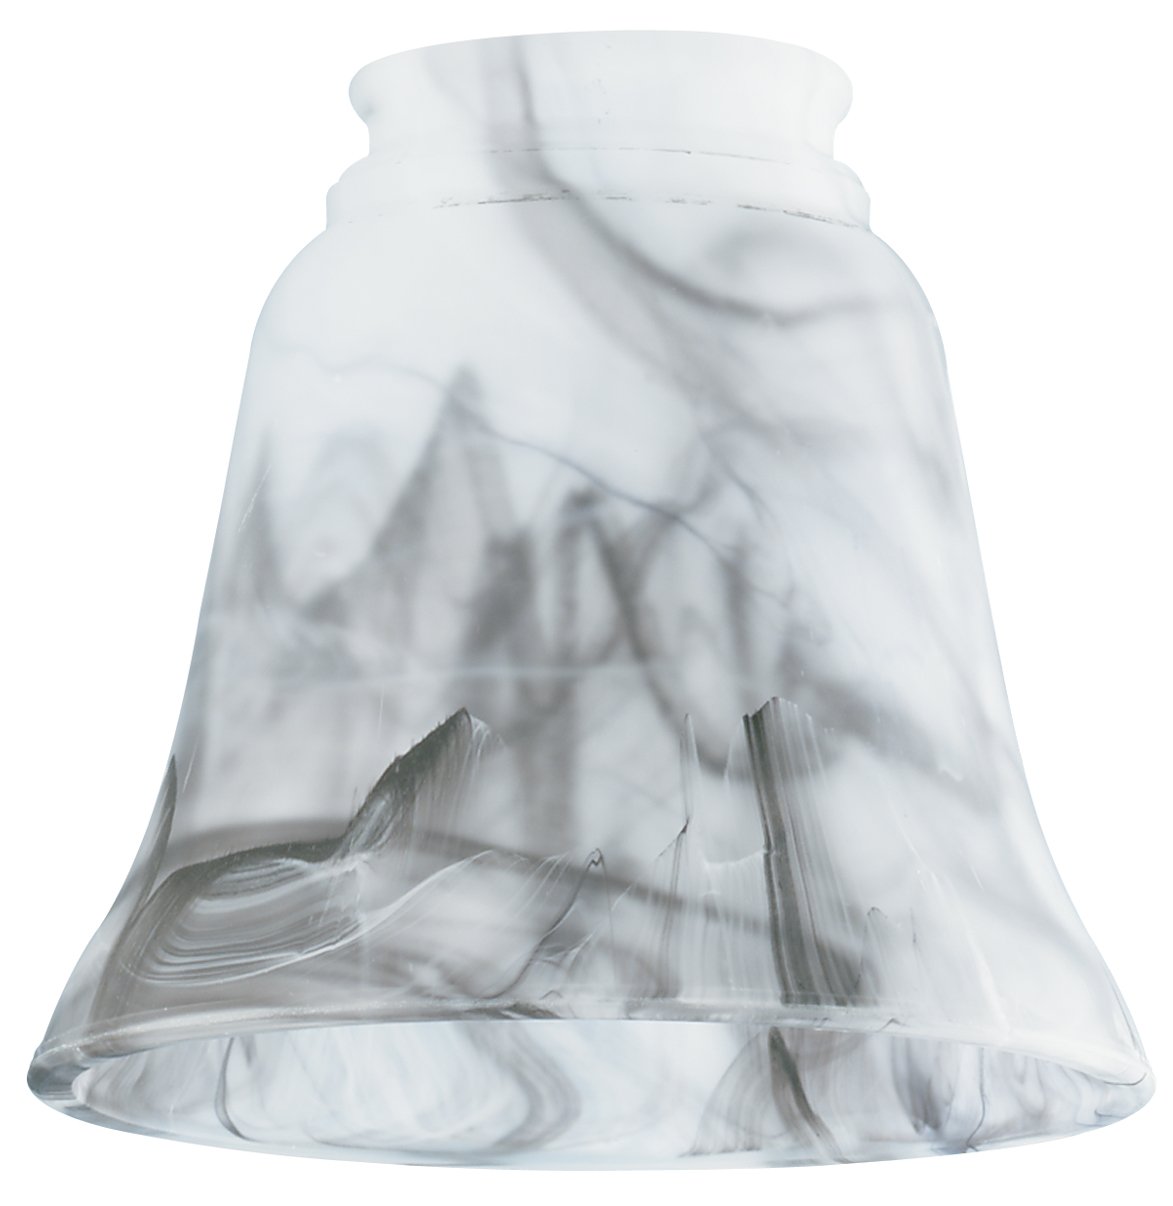 Licorice Marbleized Bell Shade